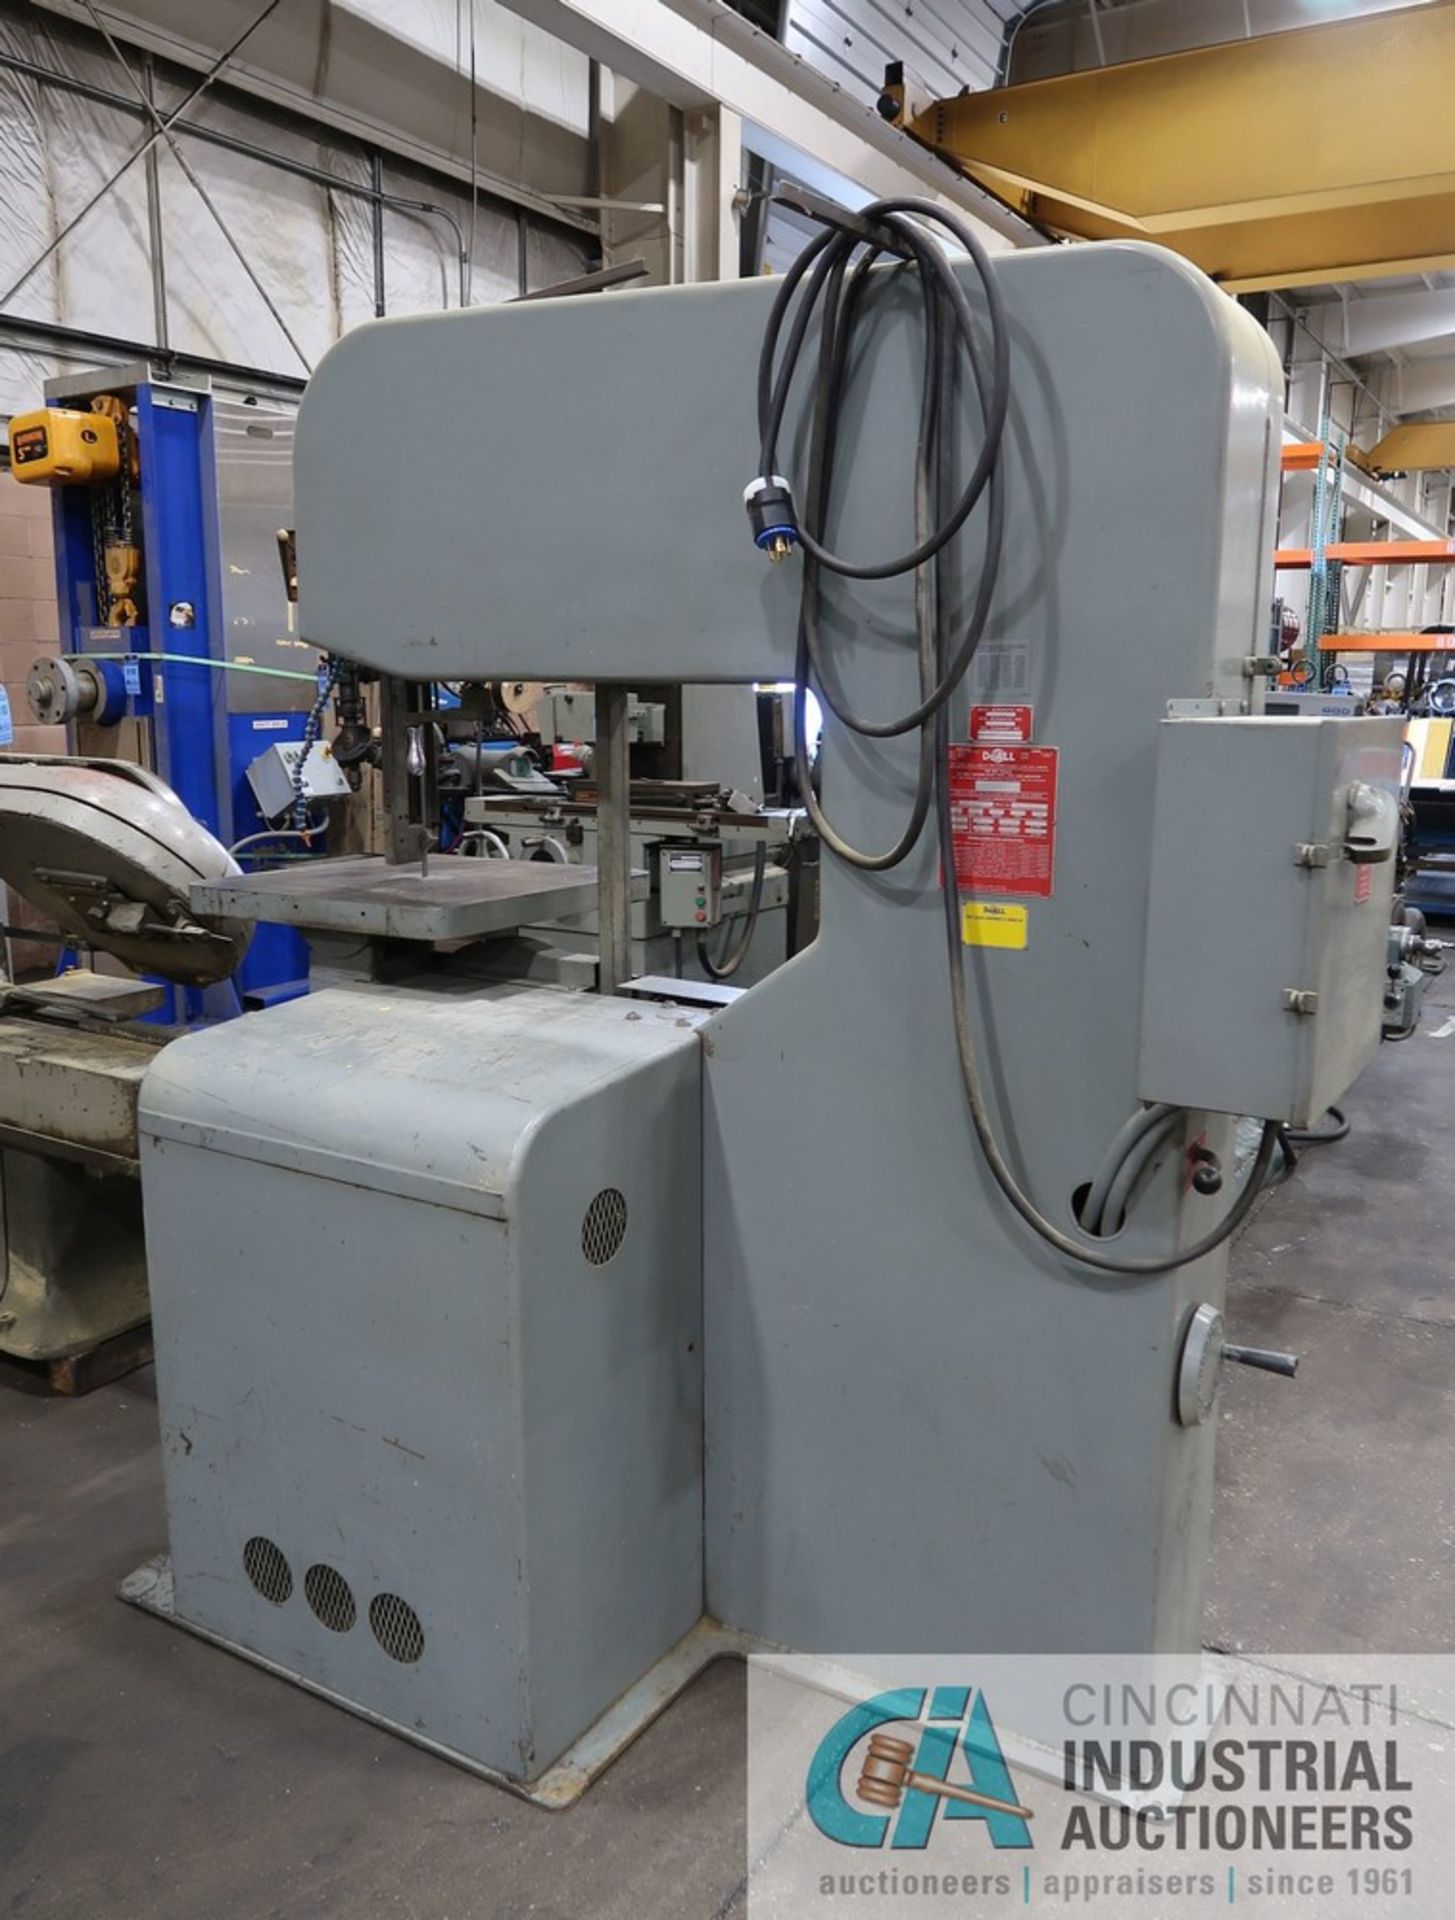 36" DOALL MODEL 3613-0 VERTICAL BANDSAW; S/N 278-73422, WITH BLADE WELDER, 3-PHASE, 220 VOLTS - Image 2 of 5